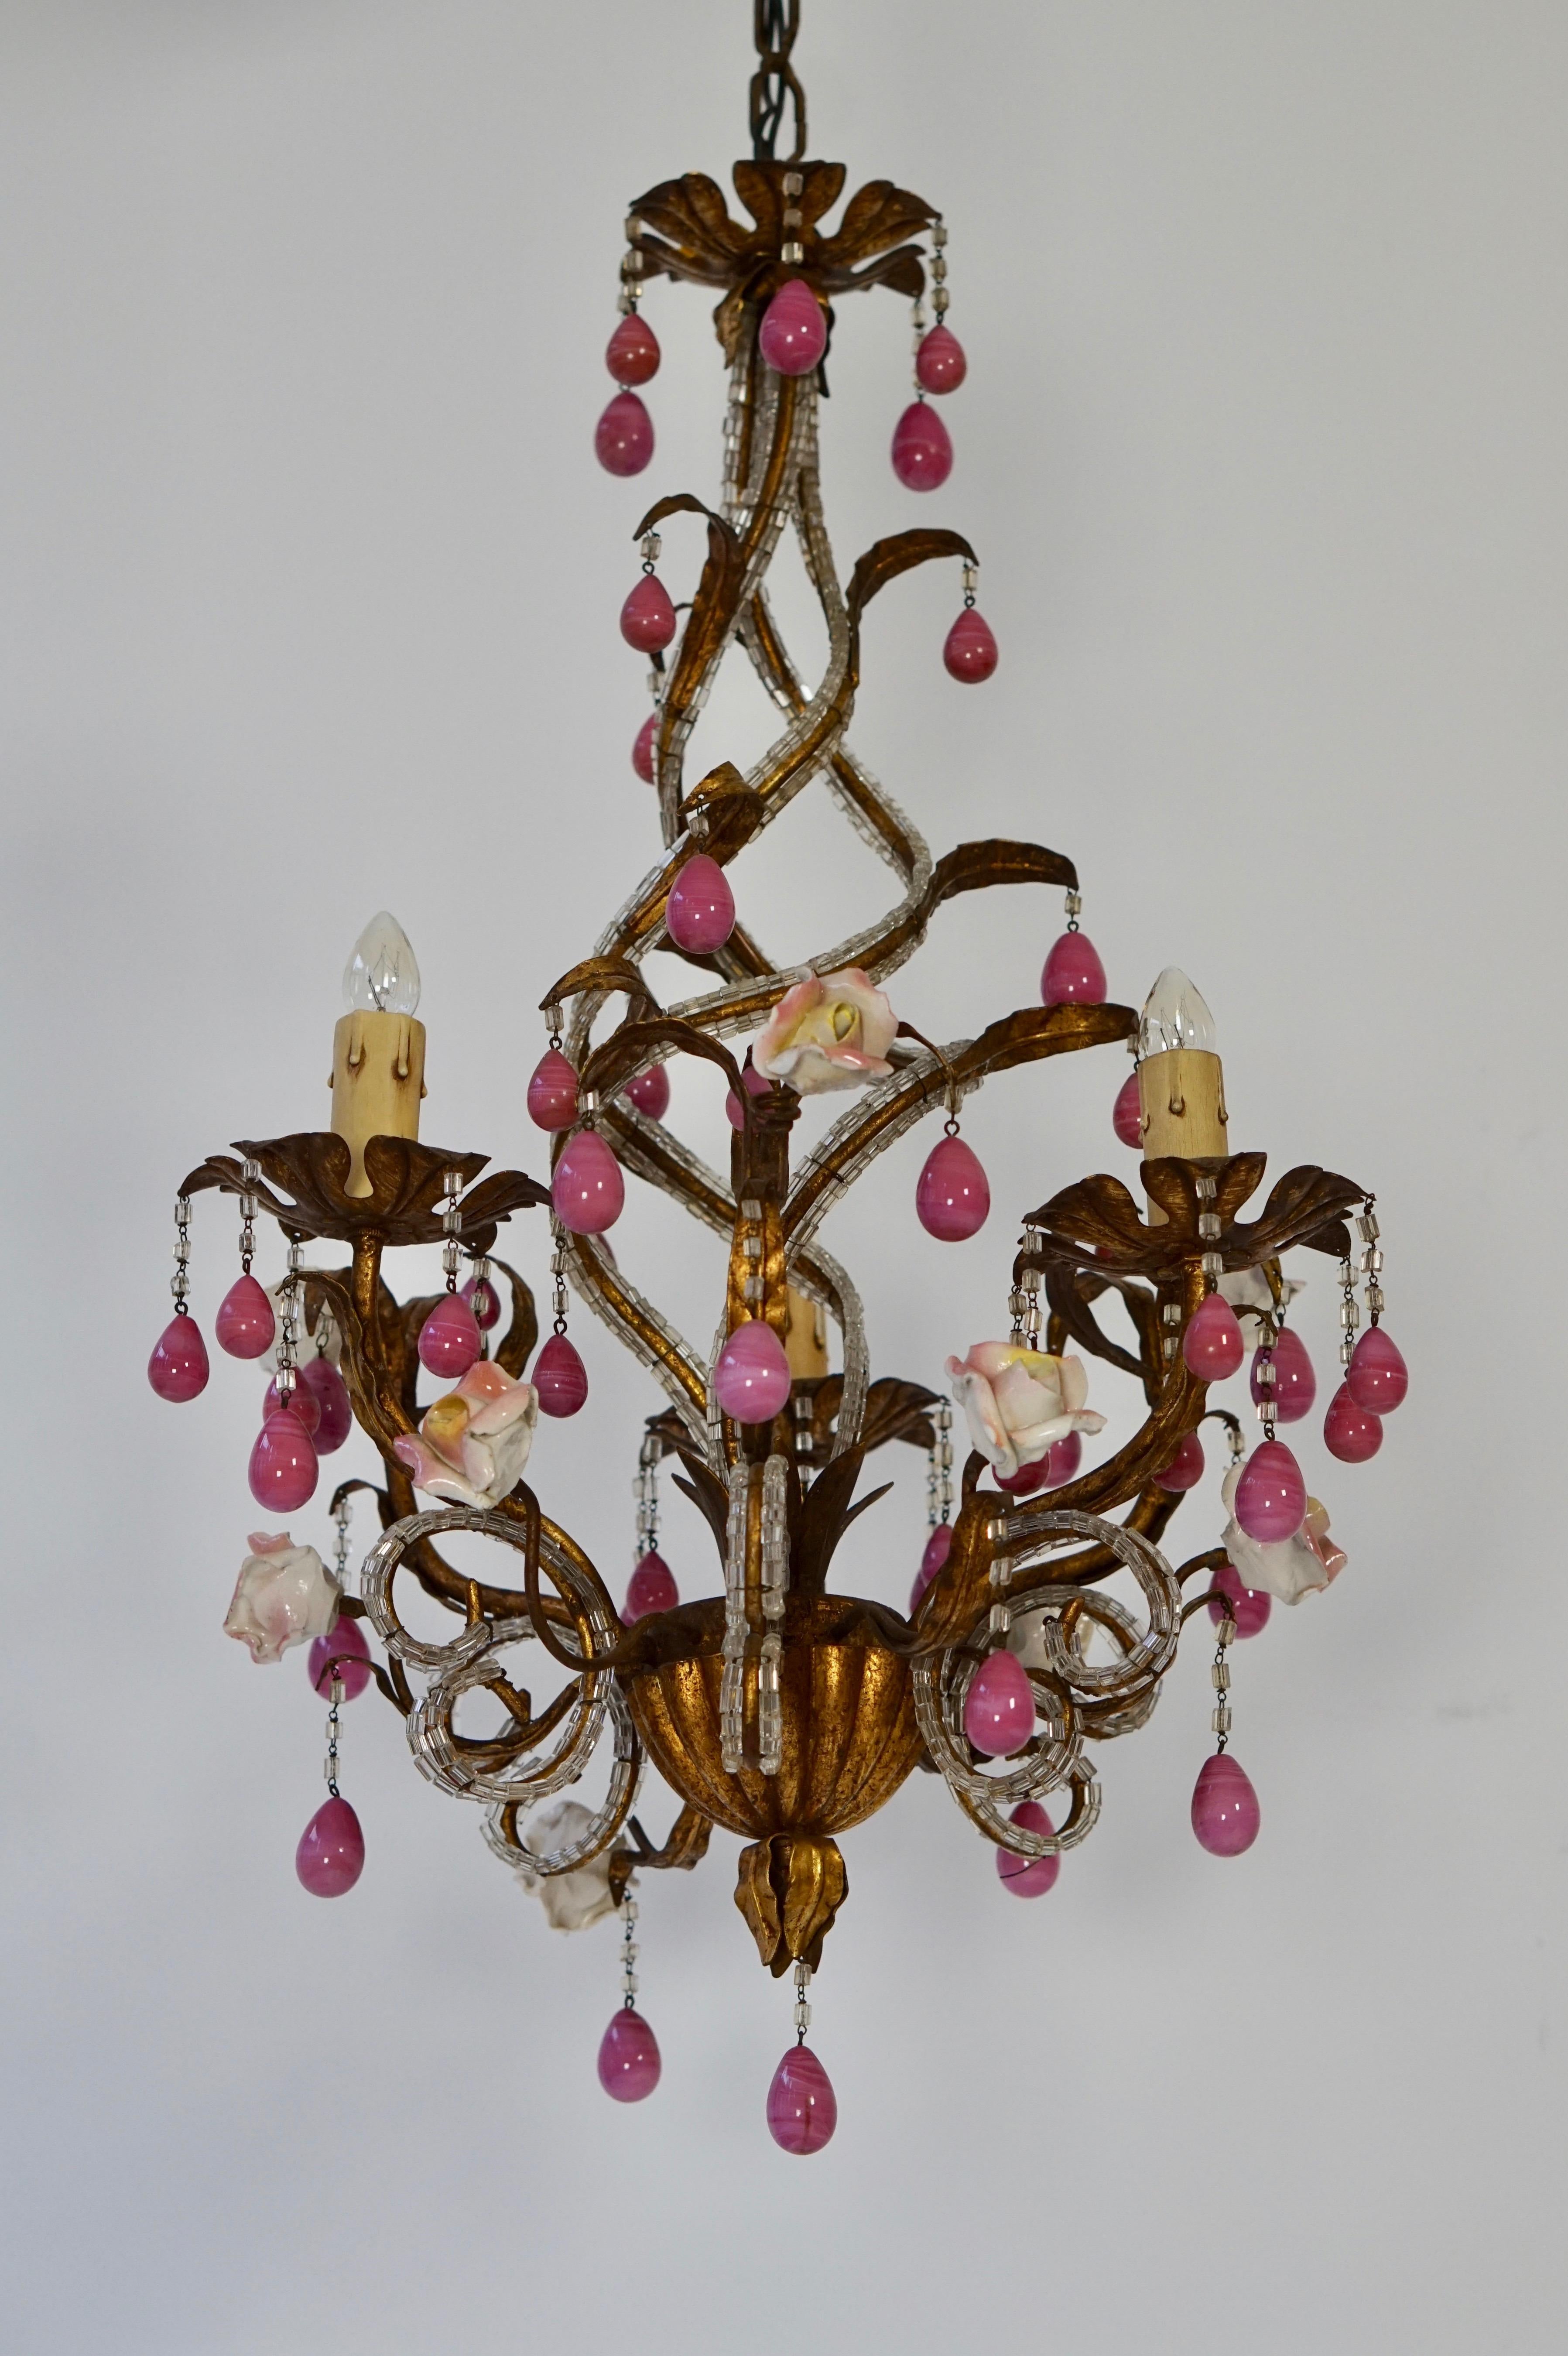 Italian Murano tree lights brass chandelier with porcelain flowers.
Diameter 38 cm.
Height fixture 60 cm.
The total height including the chain is 150 cm.